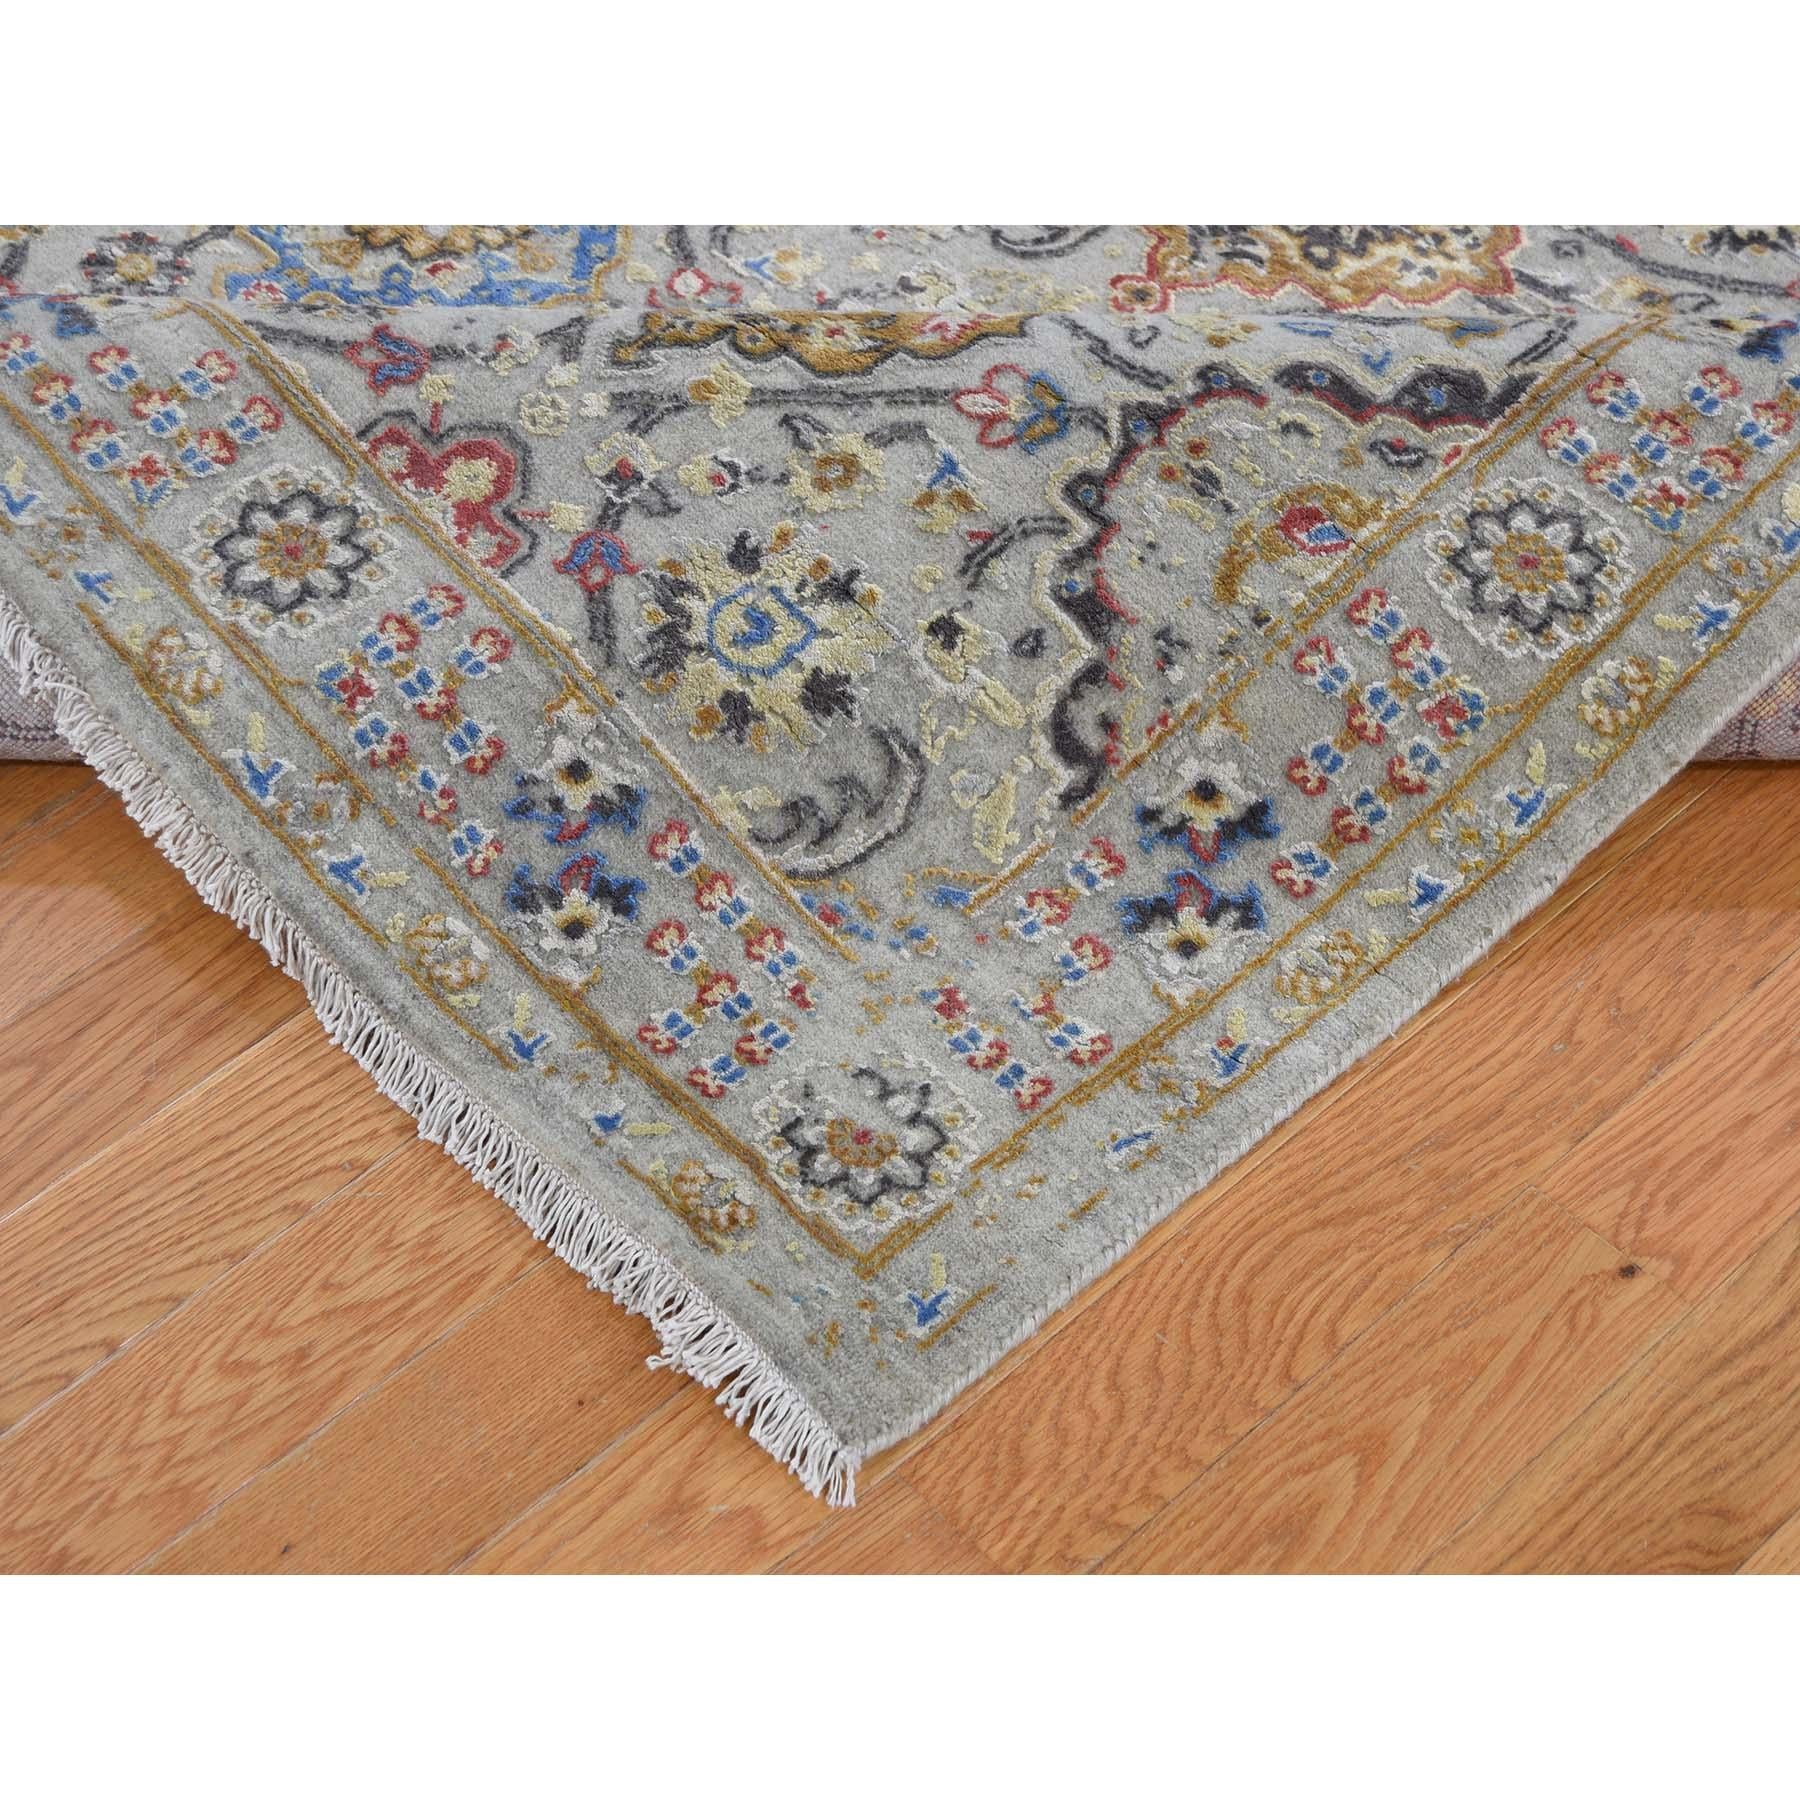 The Sunset Rosettes Pure Silk and Wool Hand-Knotted Oriental Rug 1